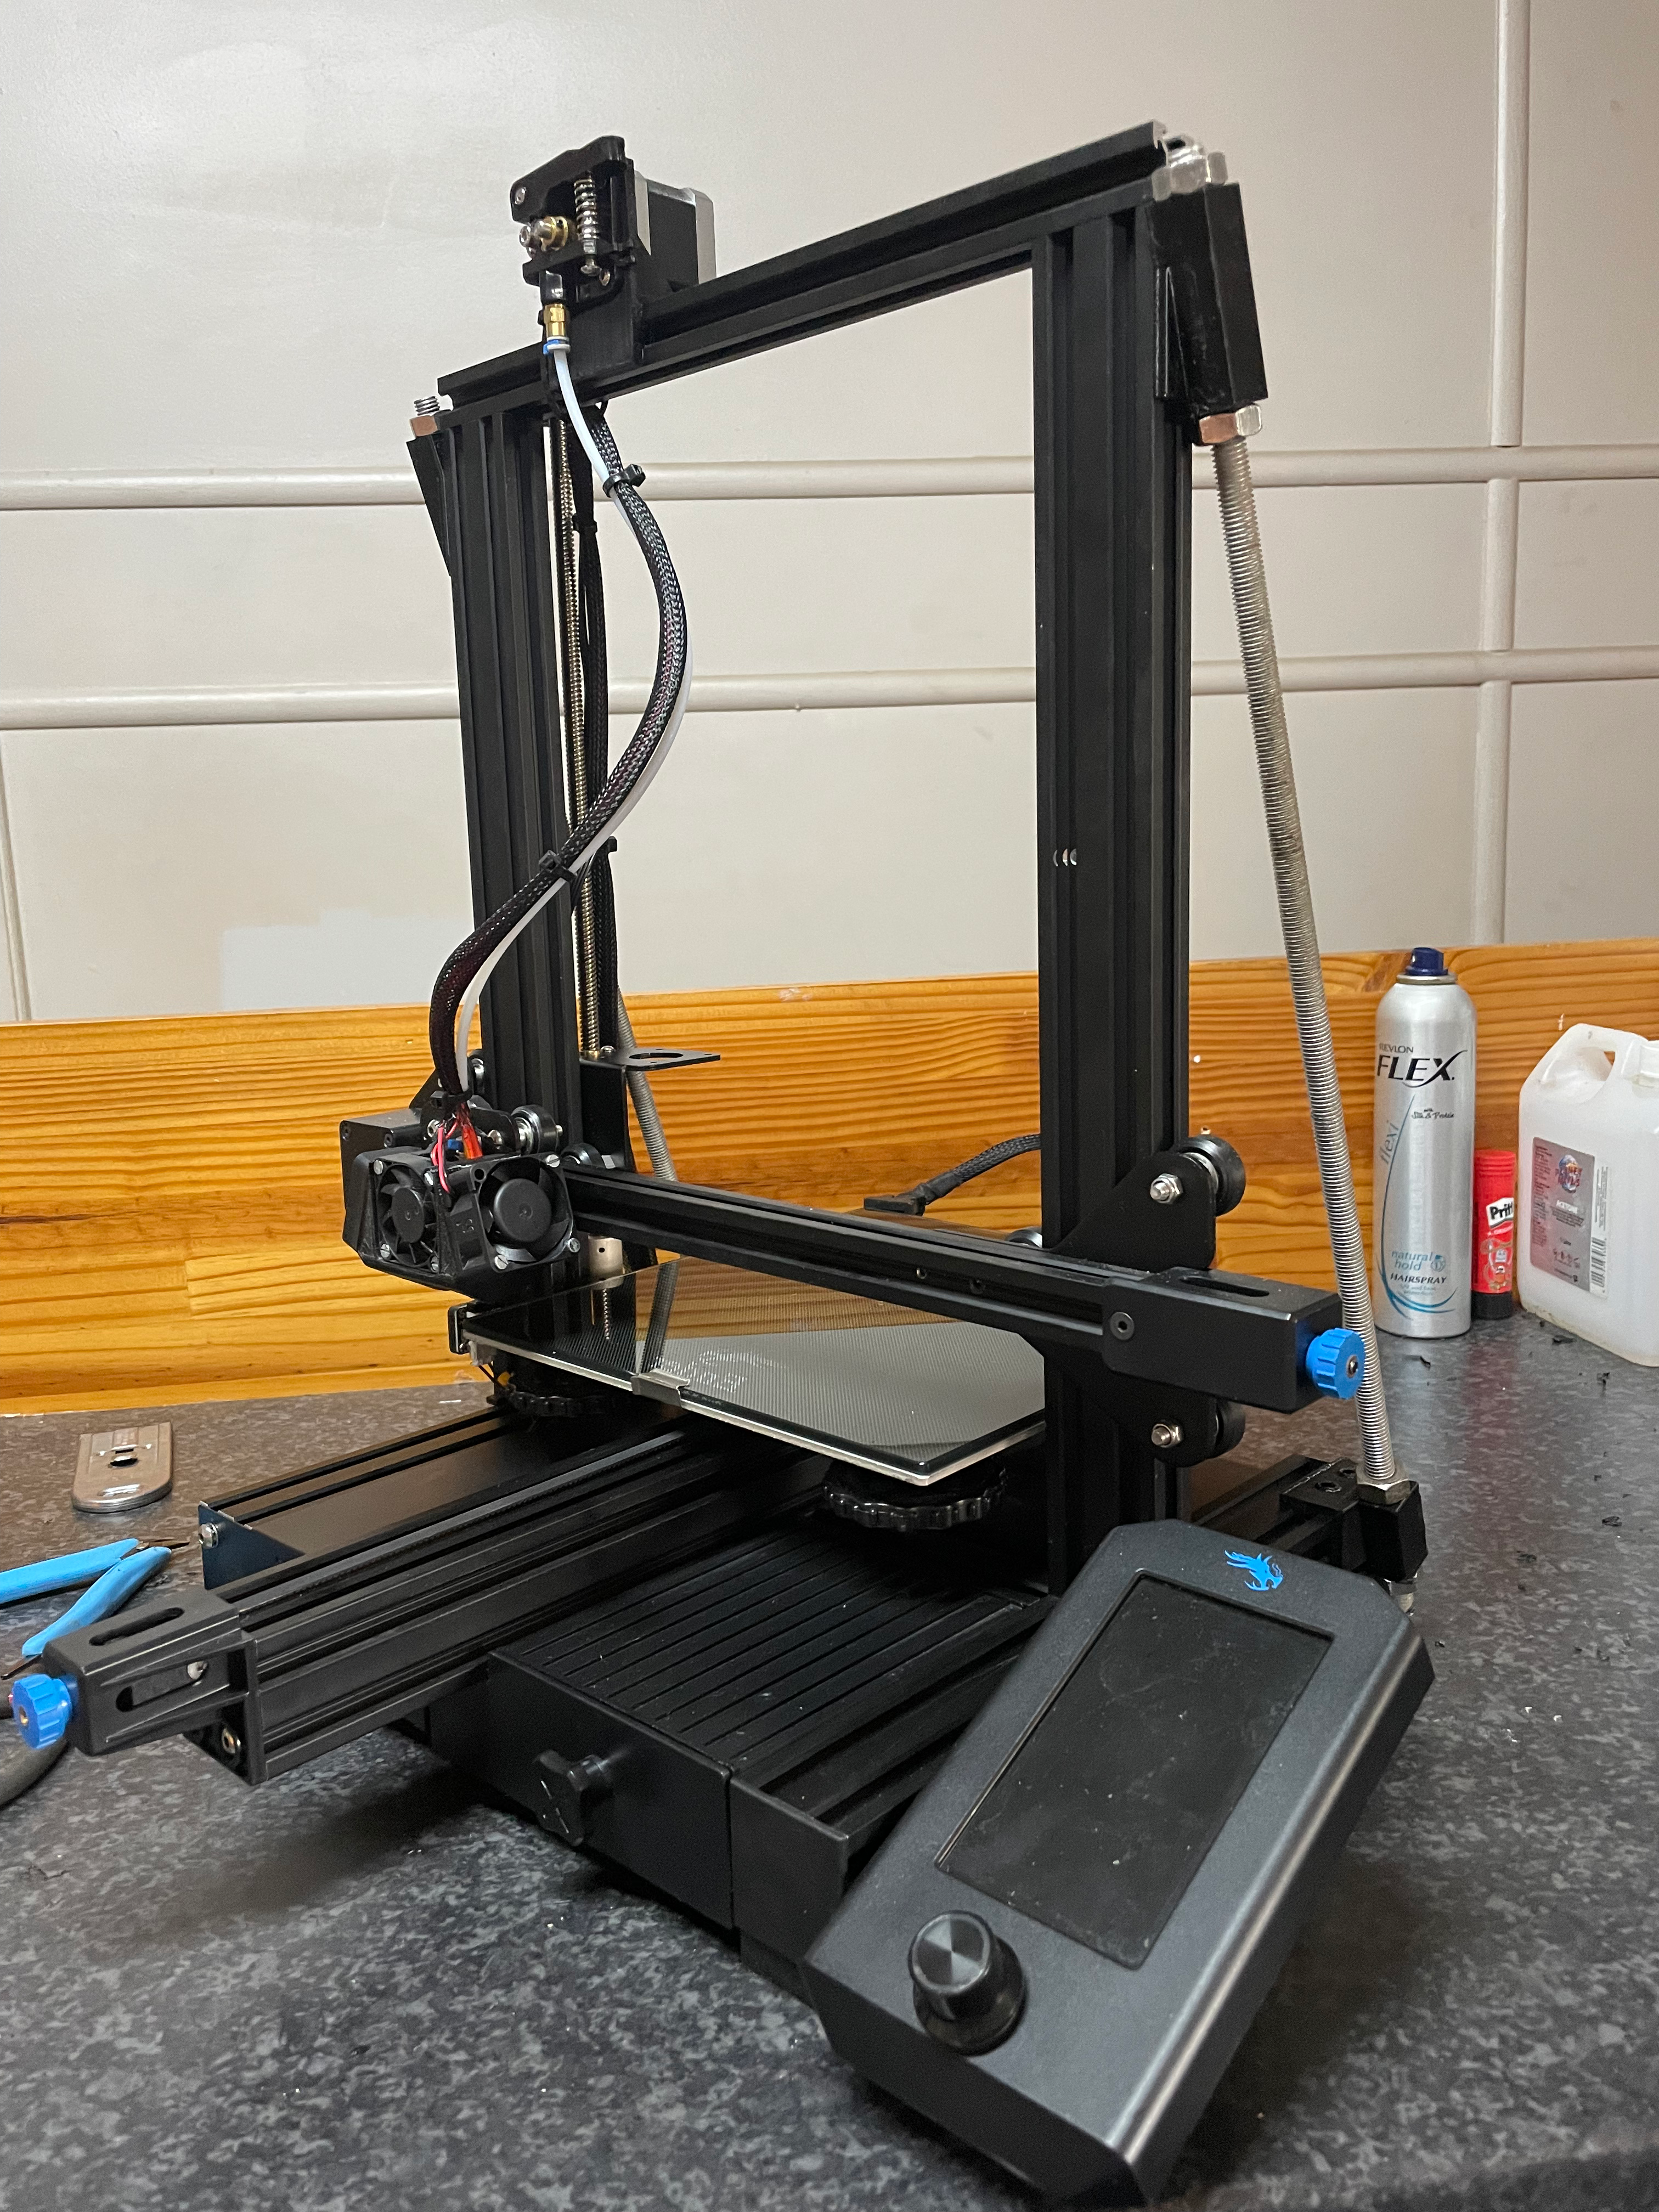 Ender 3 V2 Z Axis Supports